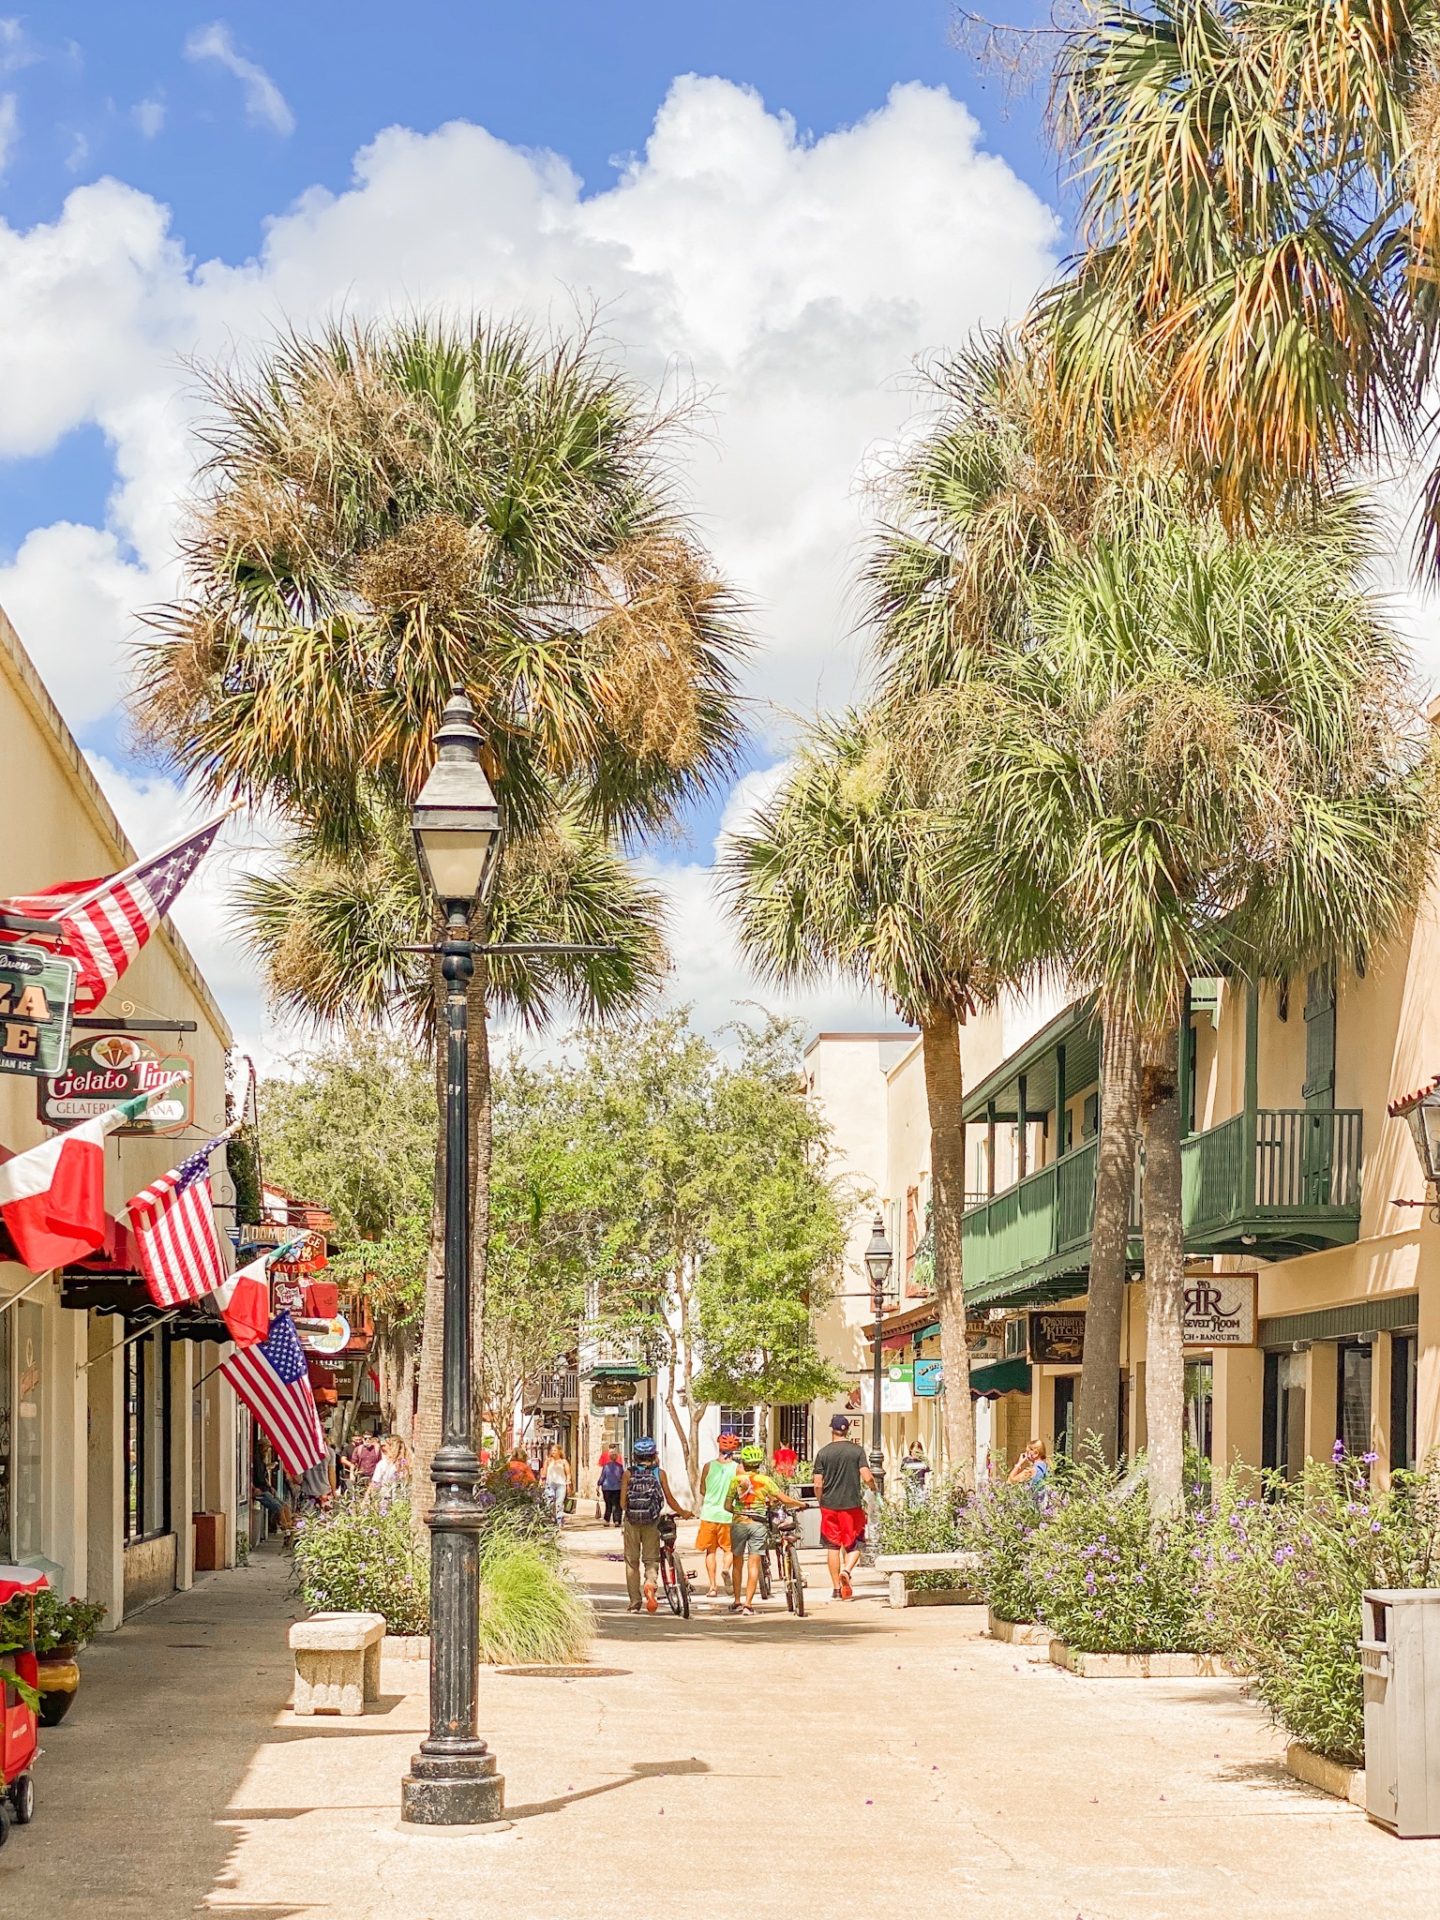 st george street in st augustine florida lined with palm trees and flags